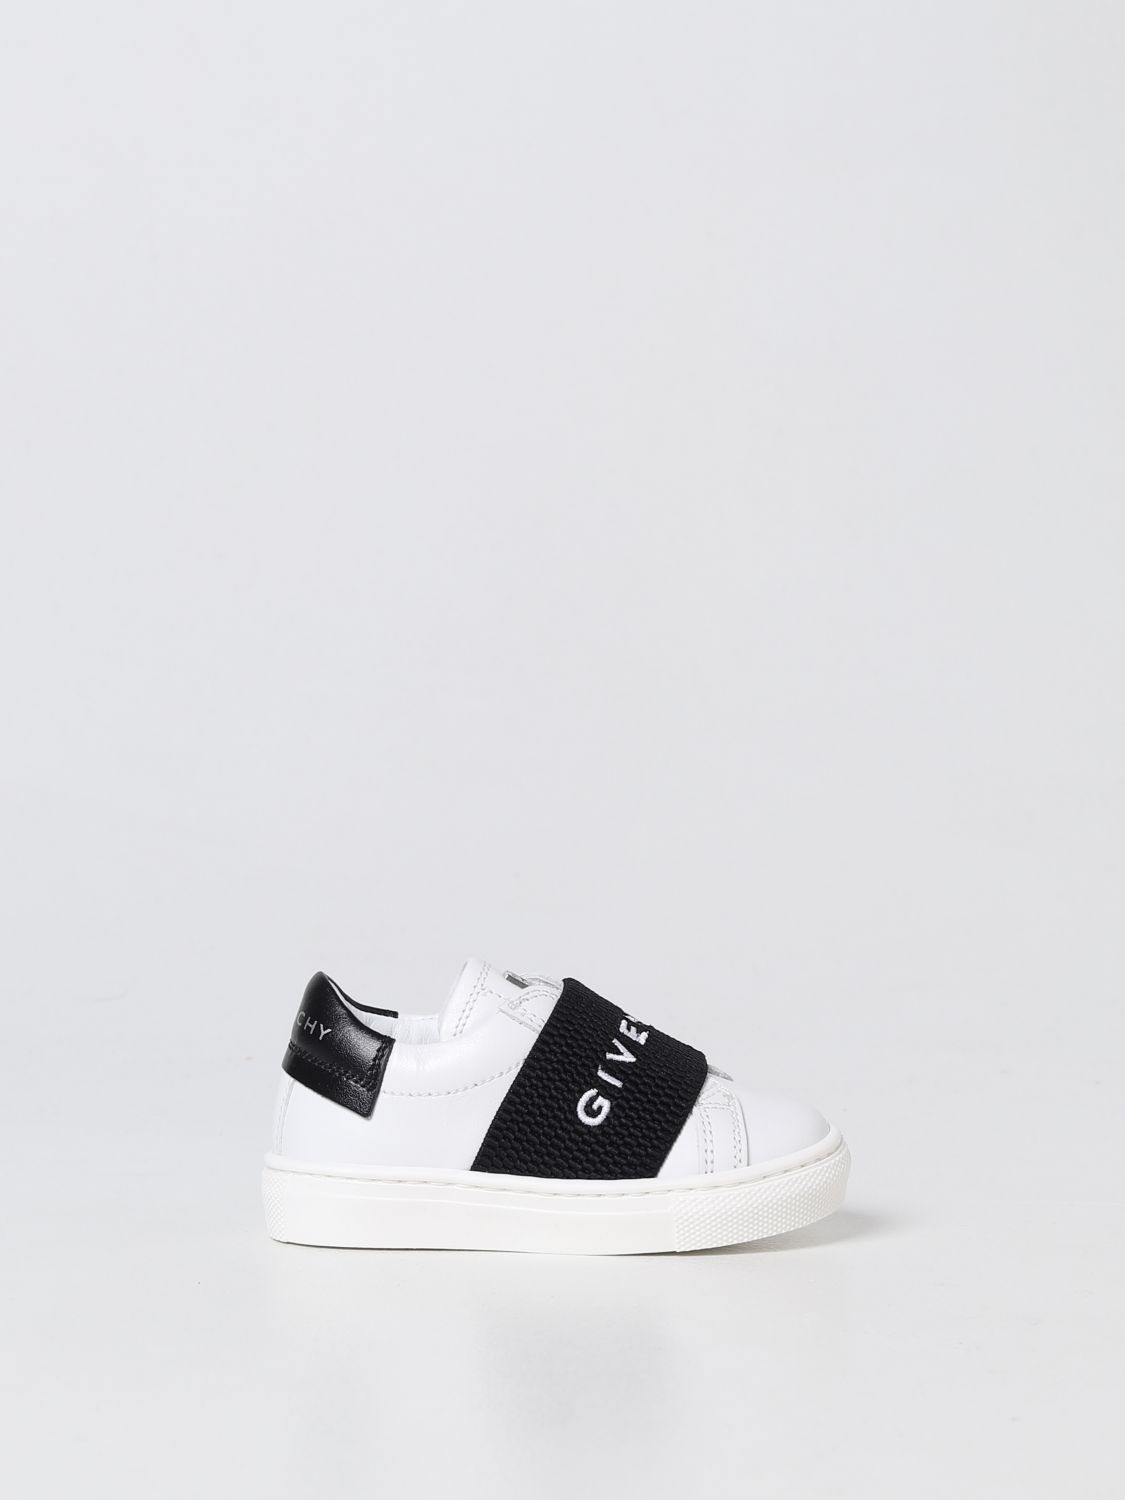 Aap kolonie Caroline GIVENCHY: shoes for boys - White | Givenchy shoes H29083 online on  GIGLIO.COM